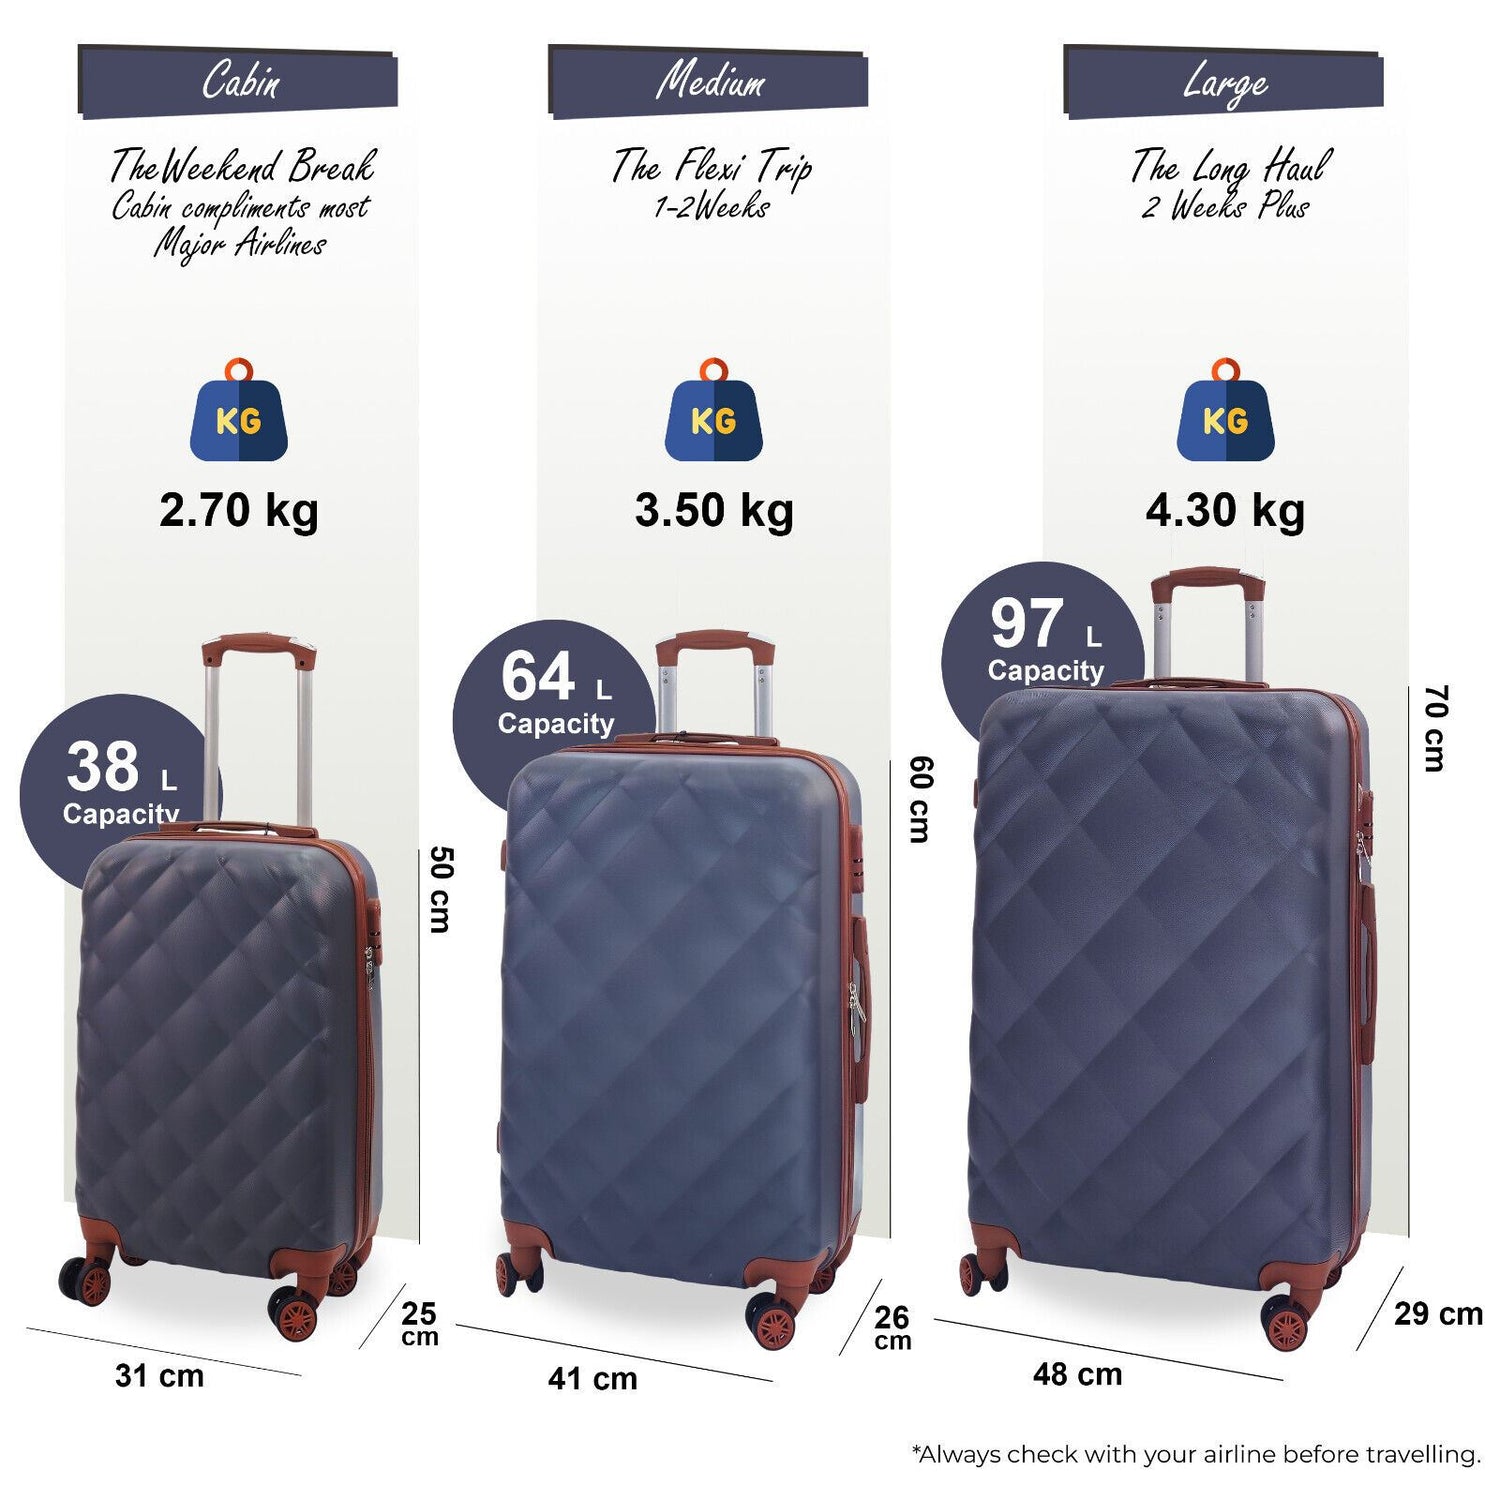 Courtland Set of 3 Soft Shell Suitcase in Grey